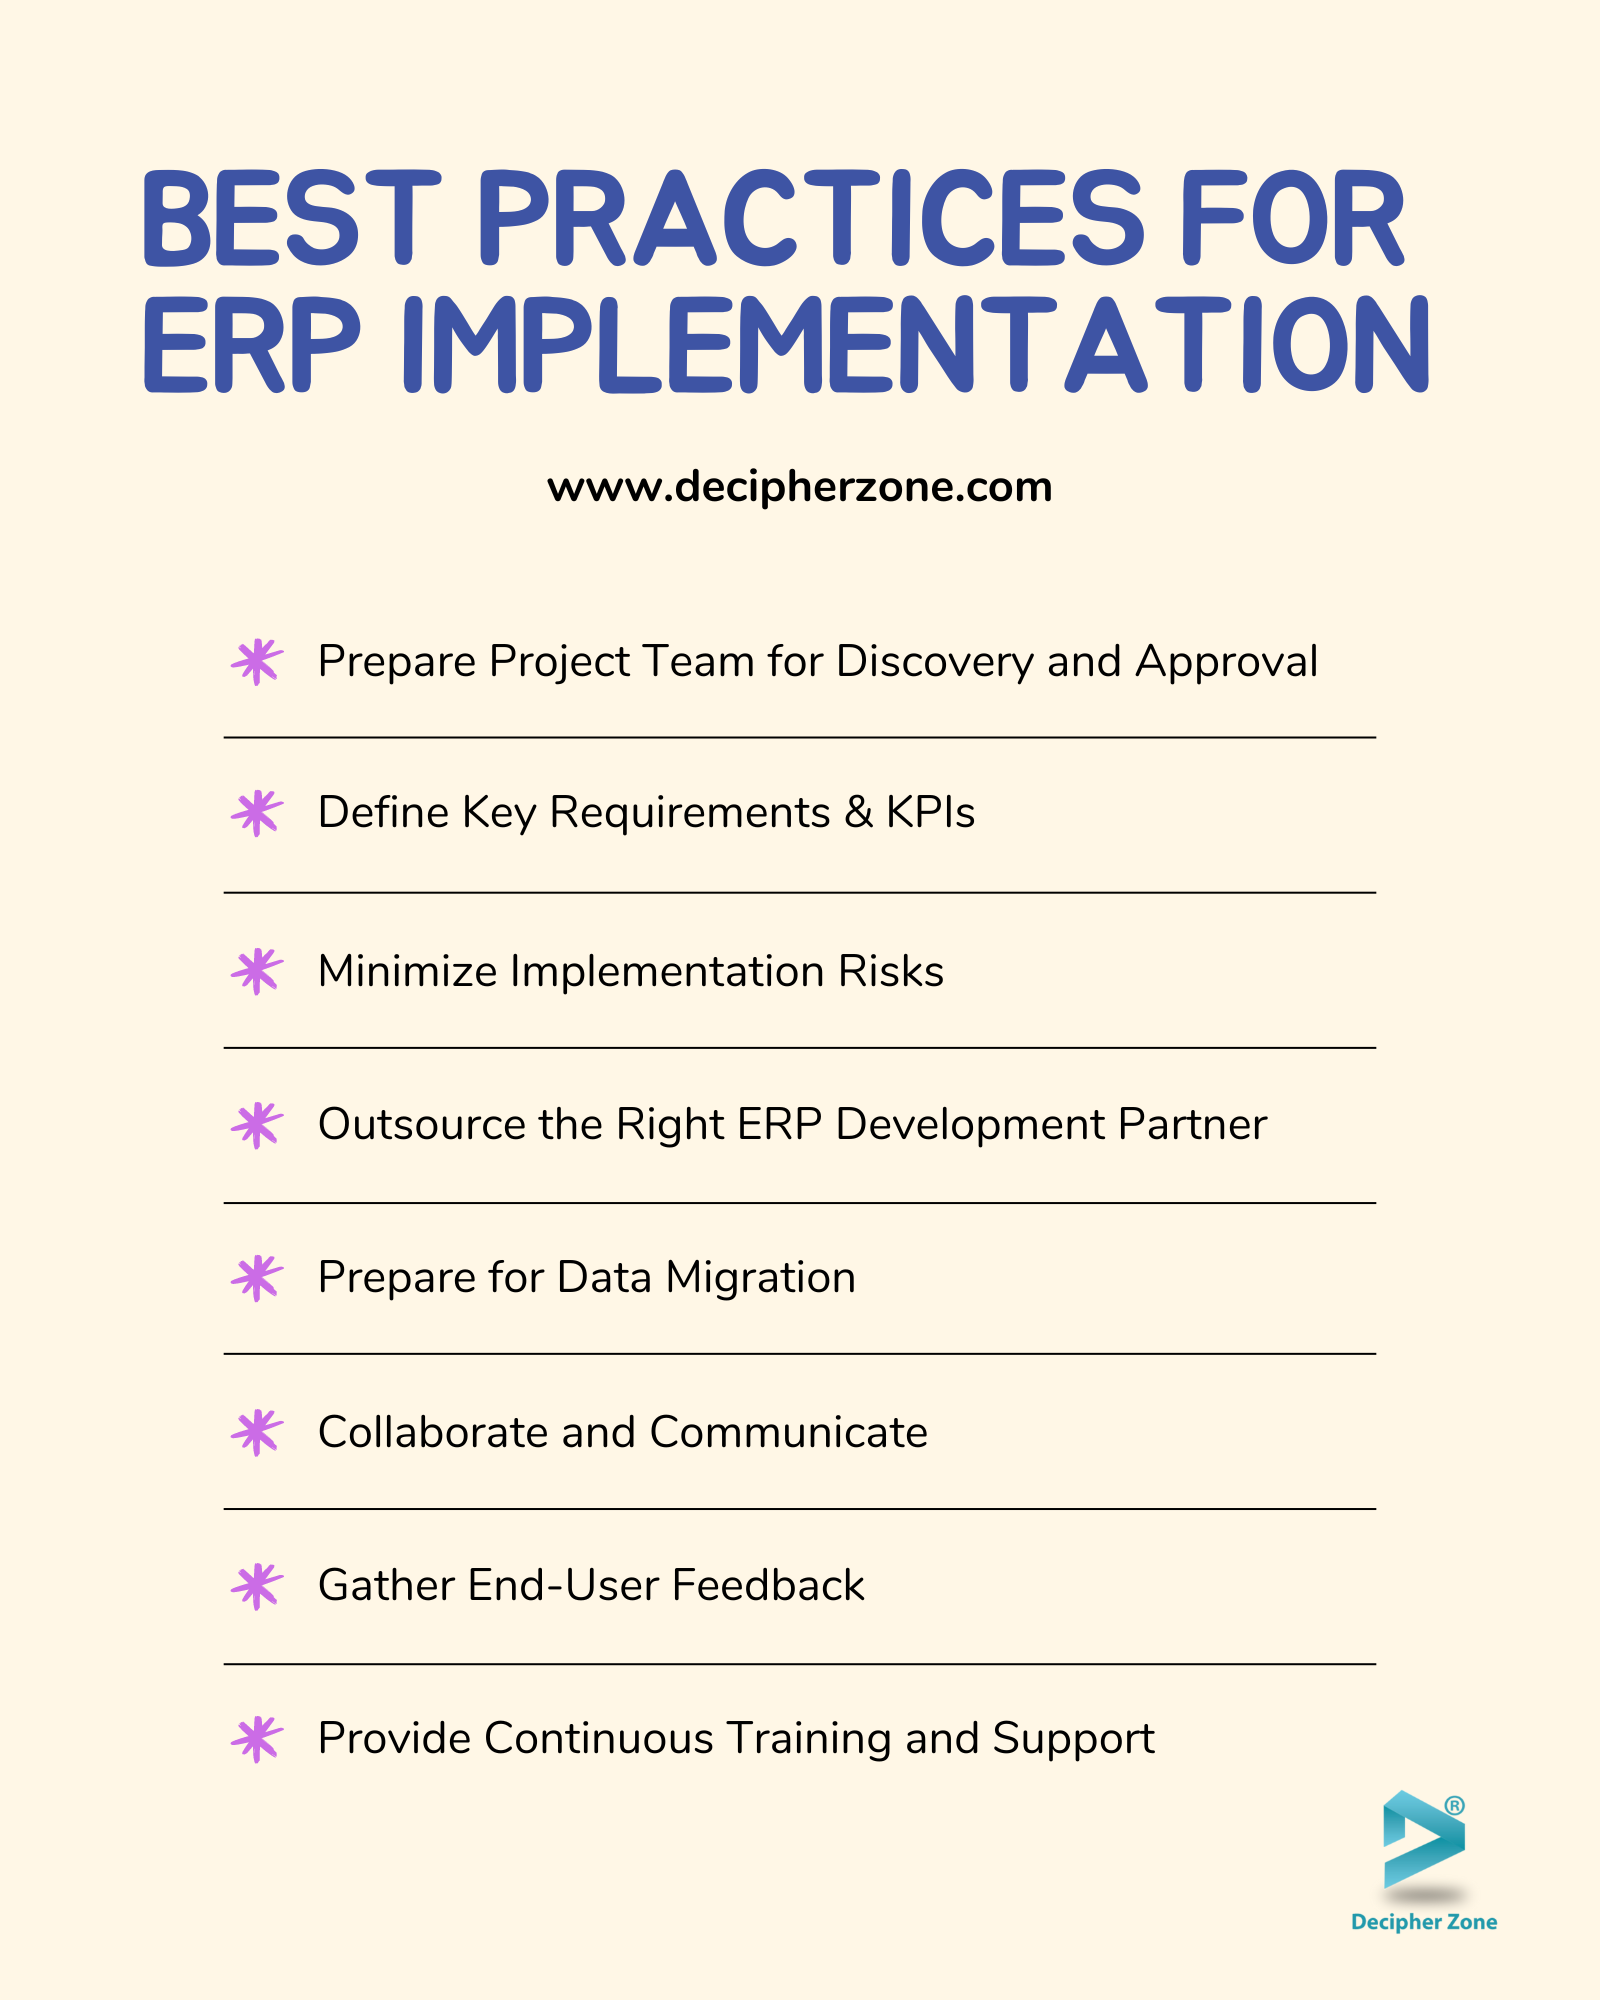 Best Practices for ERP Implementation